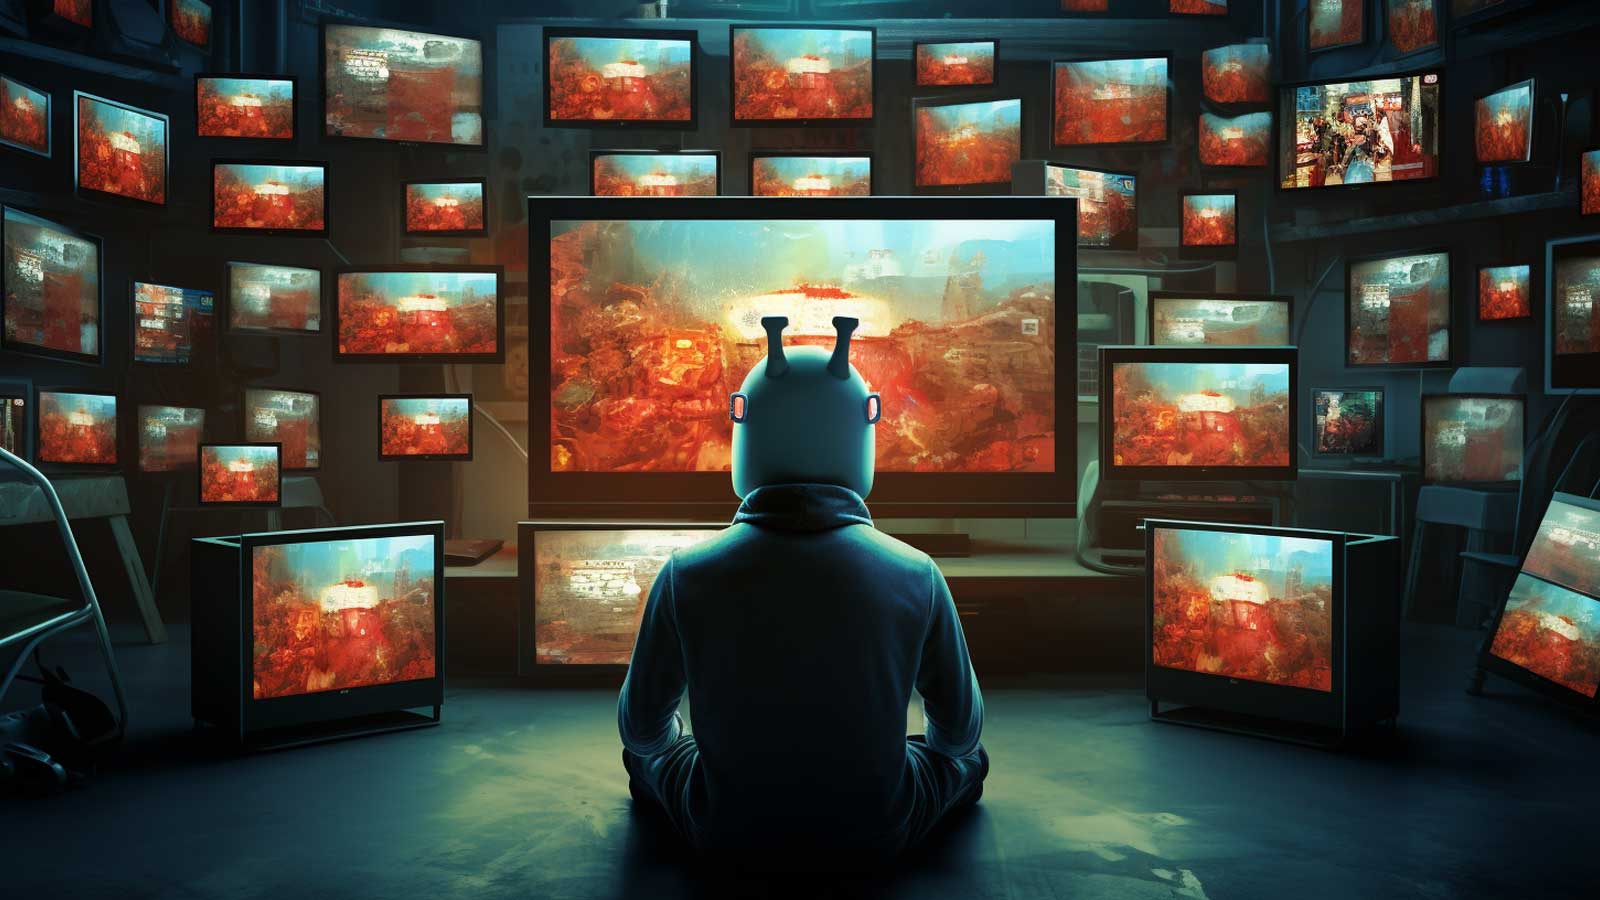 Android malware infecting TVs